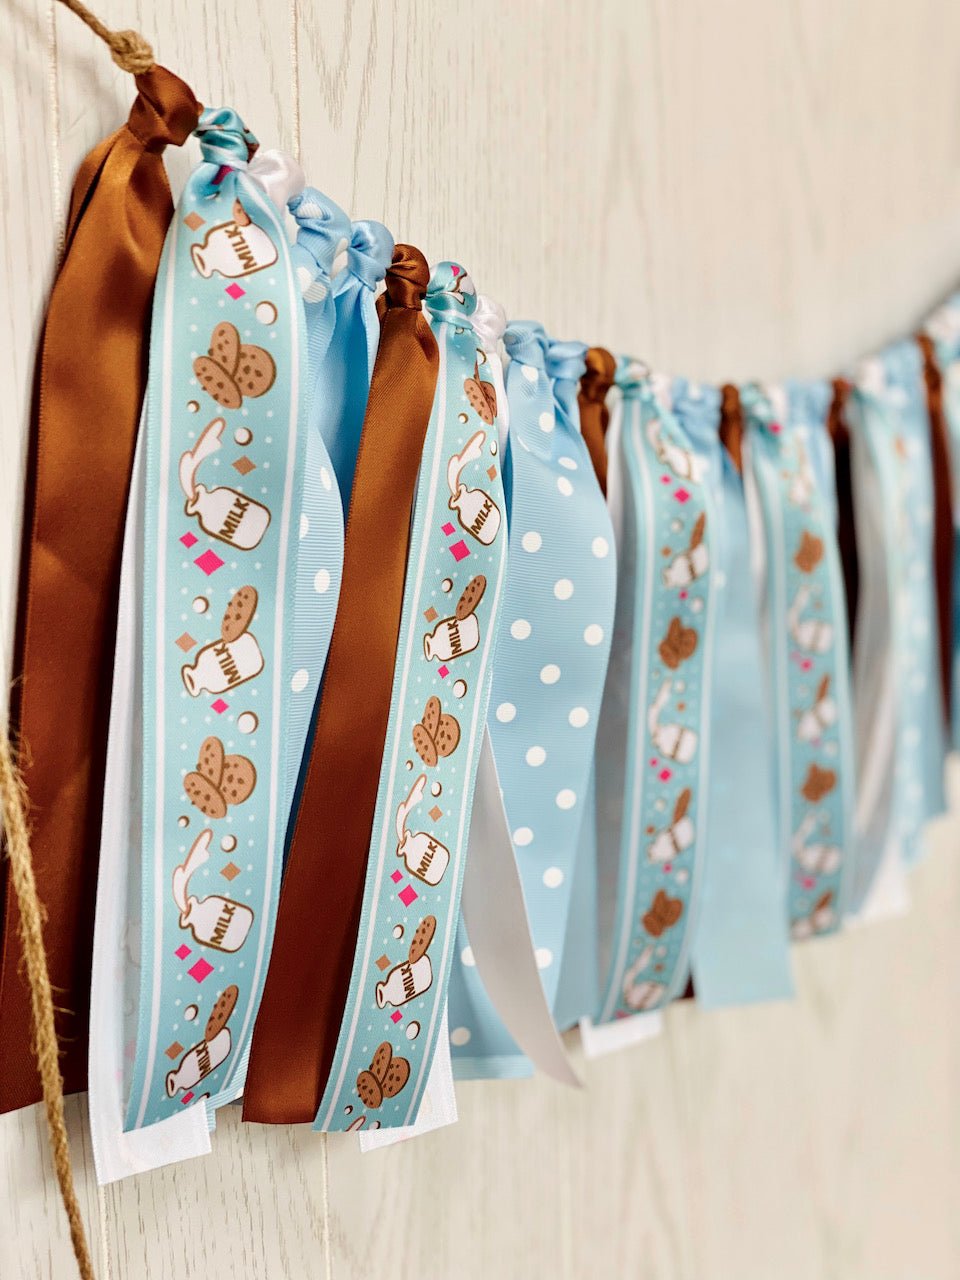 Milk & Cookies (Blue) Ribbon Bunting - FREE Shipping - The Party Teacher